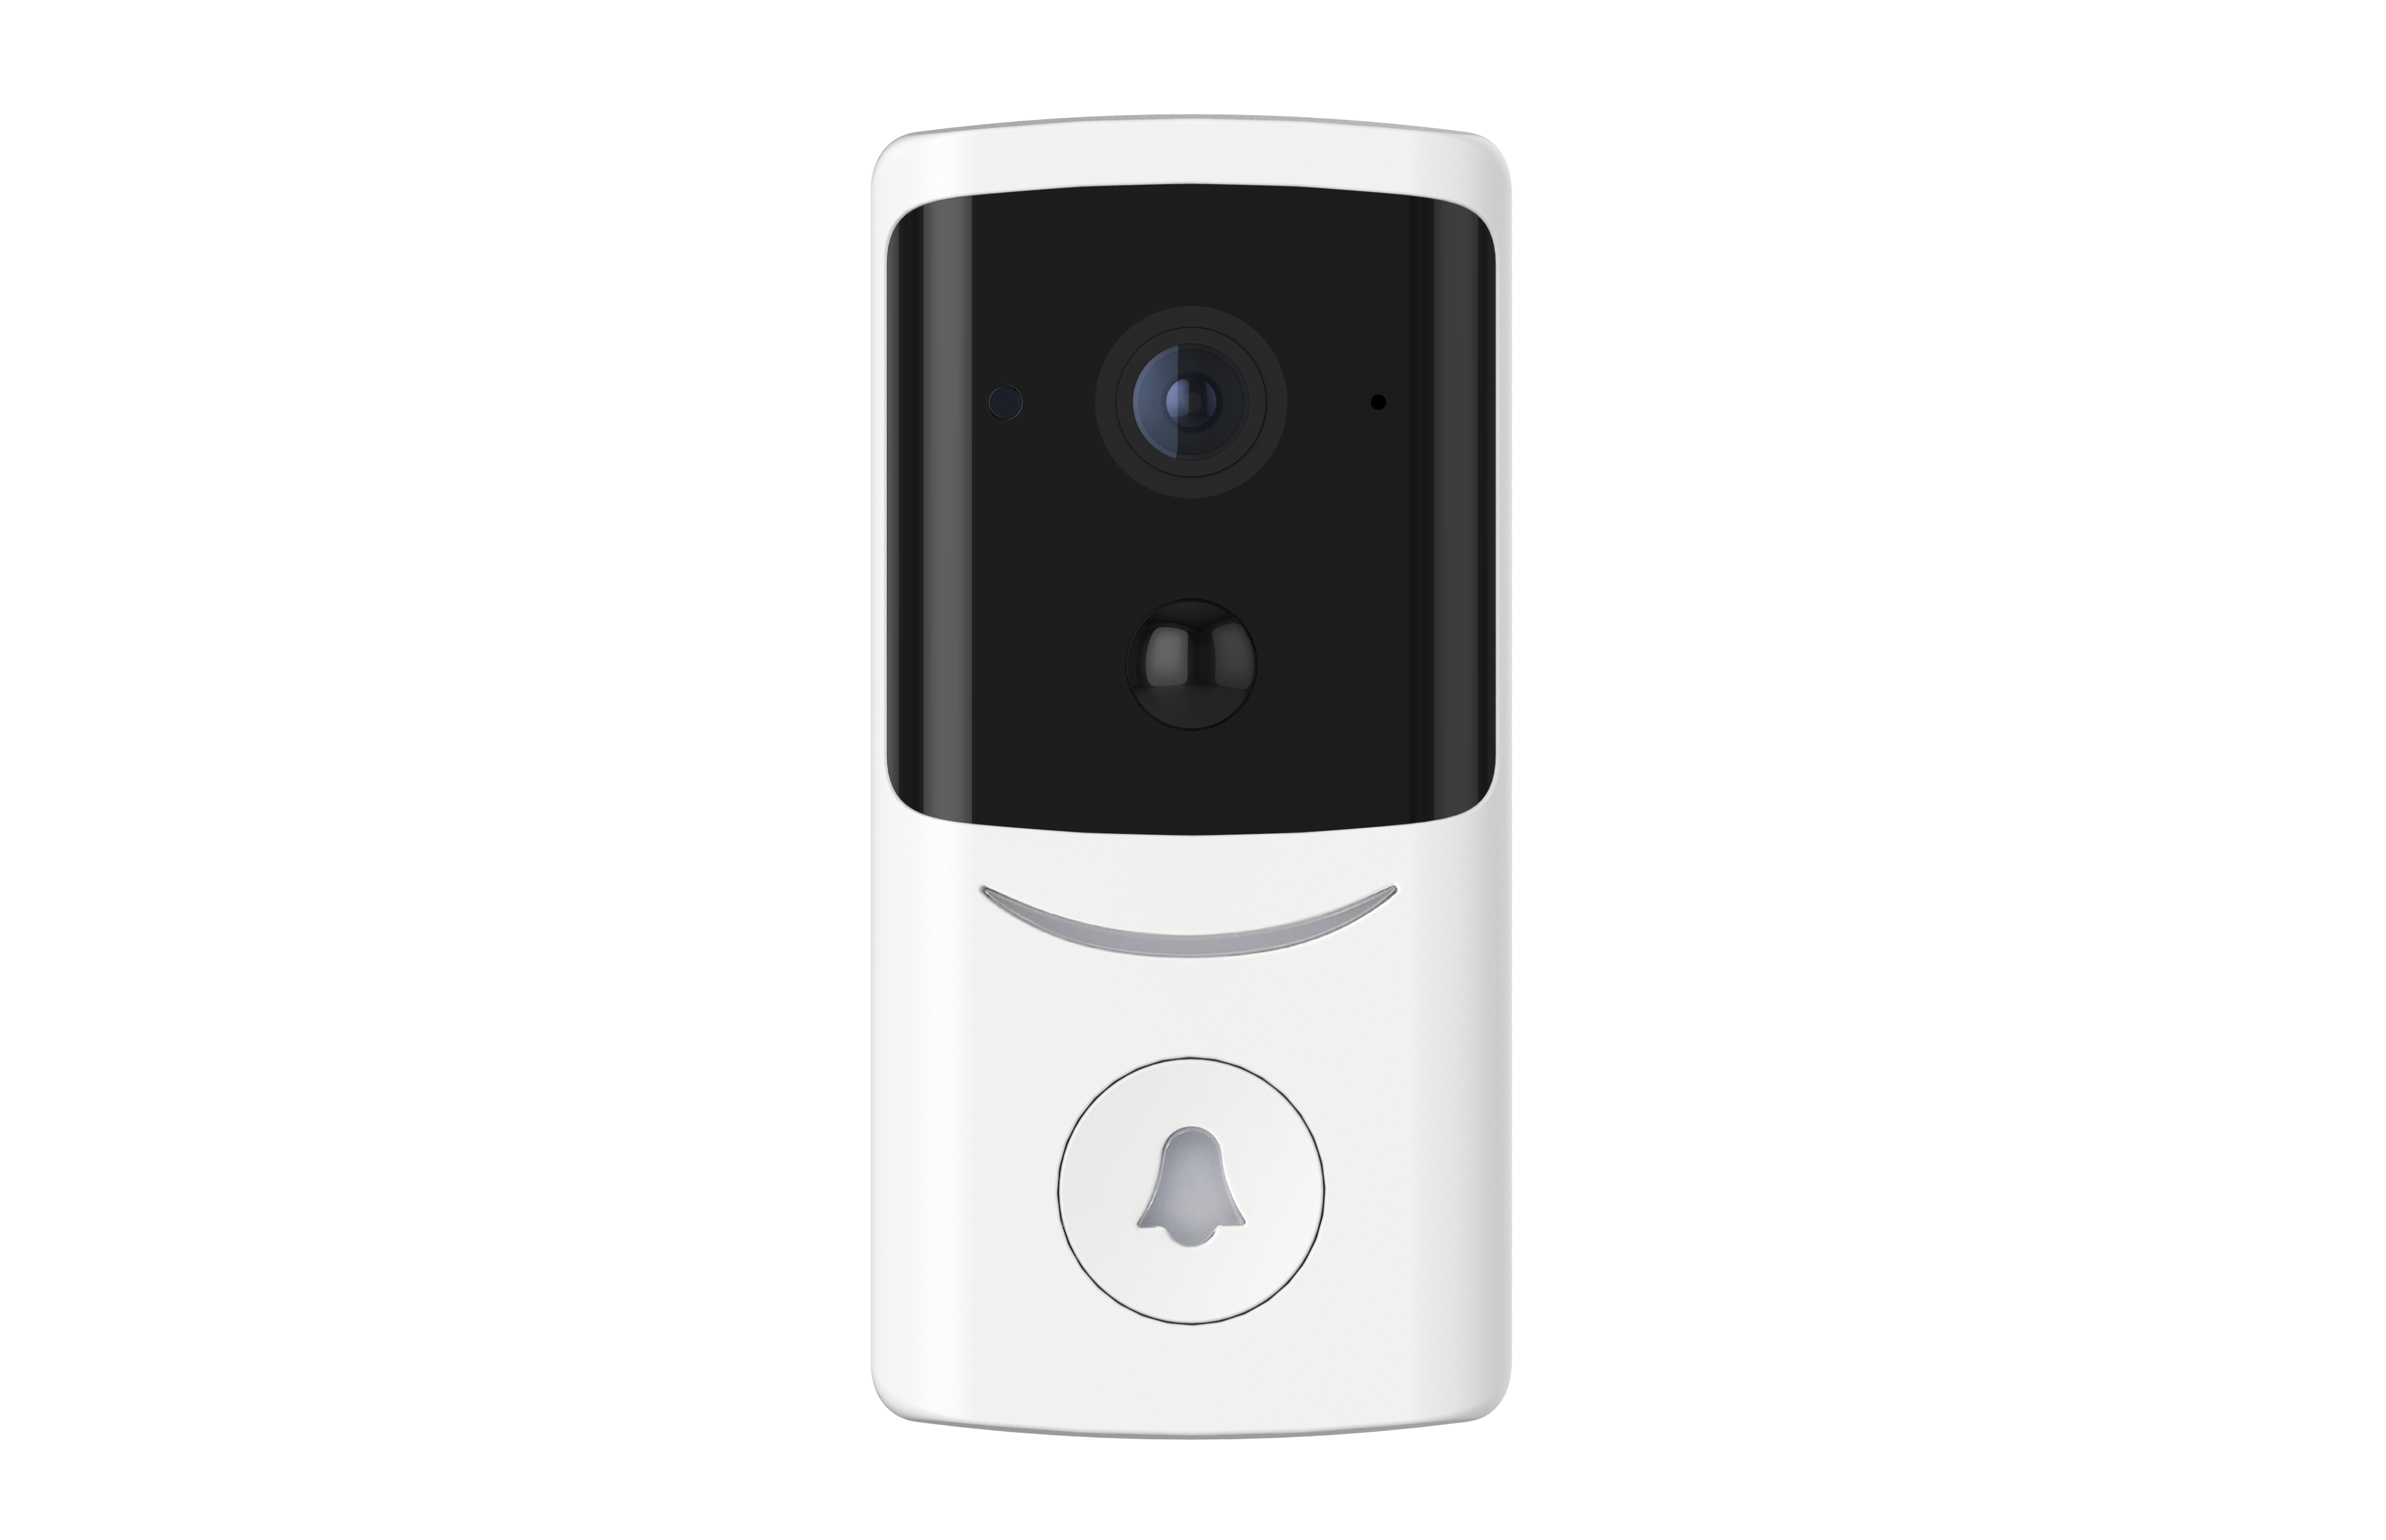 Video doorbell camera is like this?